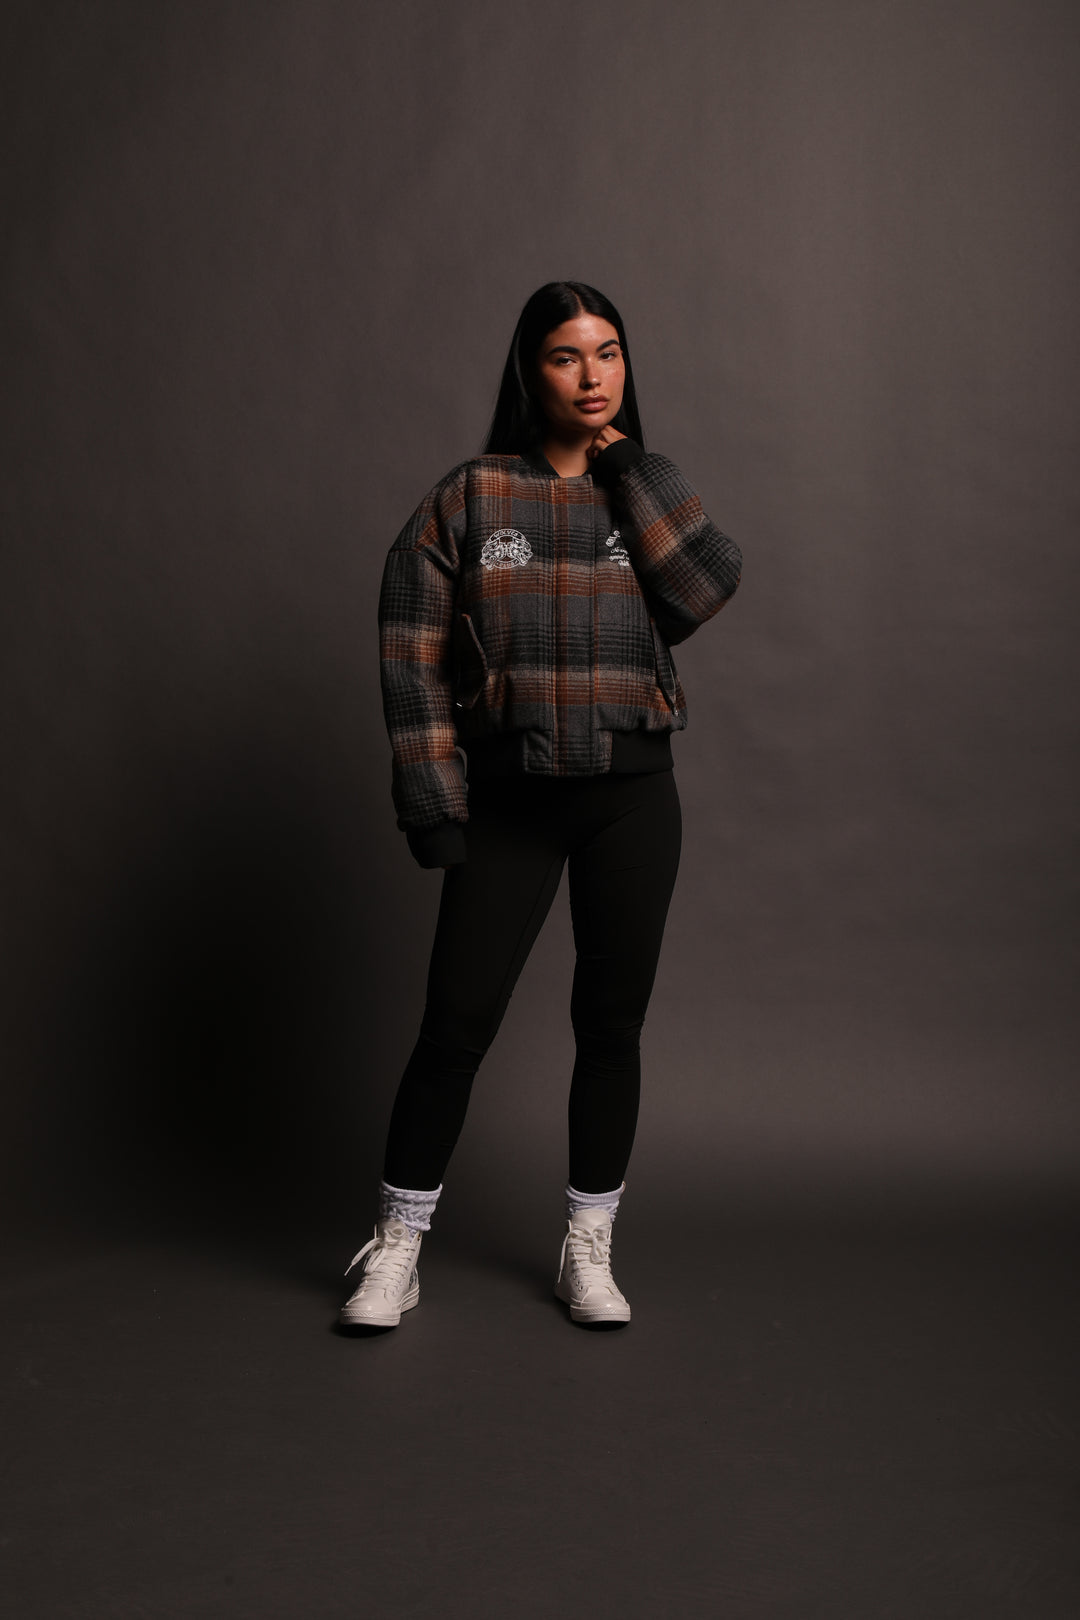 She Chopper Vicious Bomber Jacket in Taupe Tartan